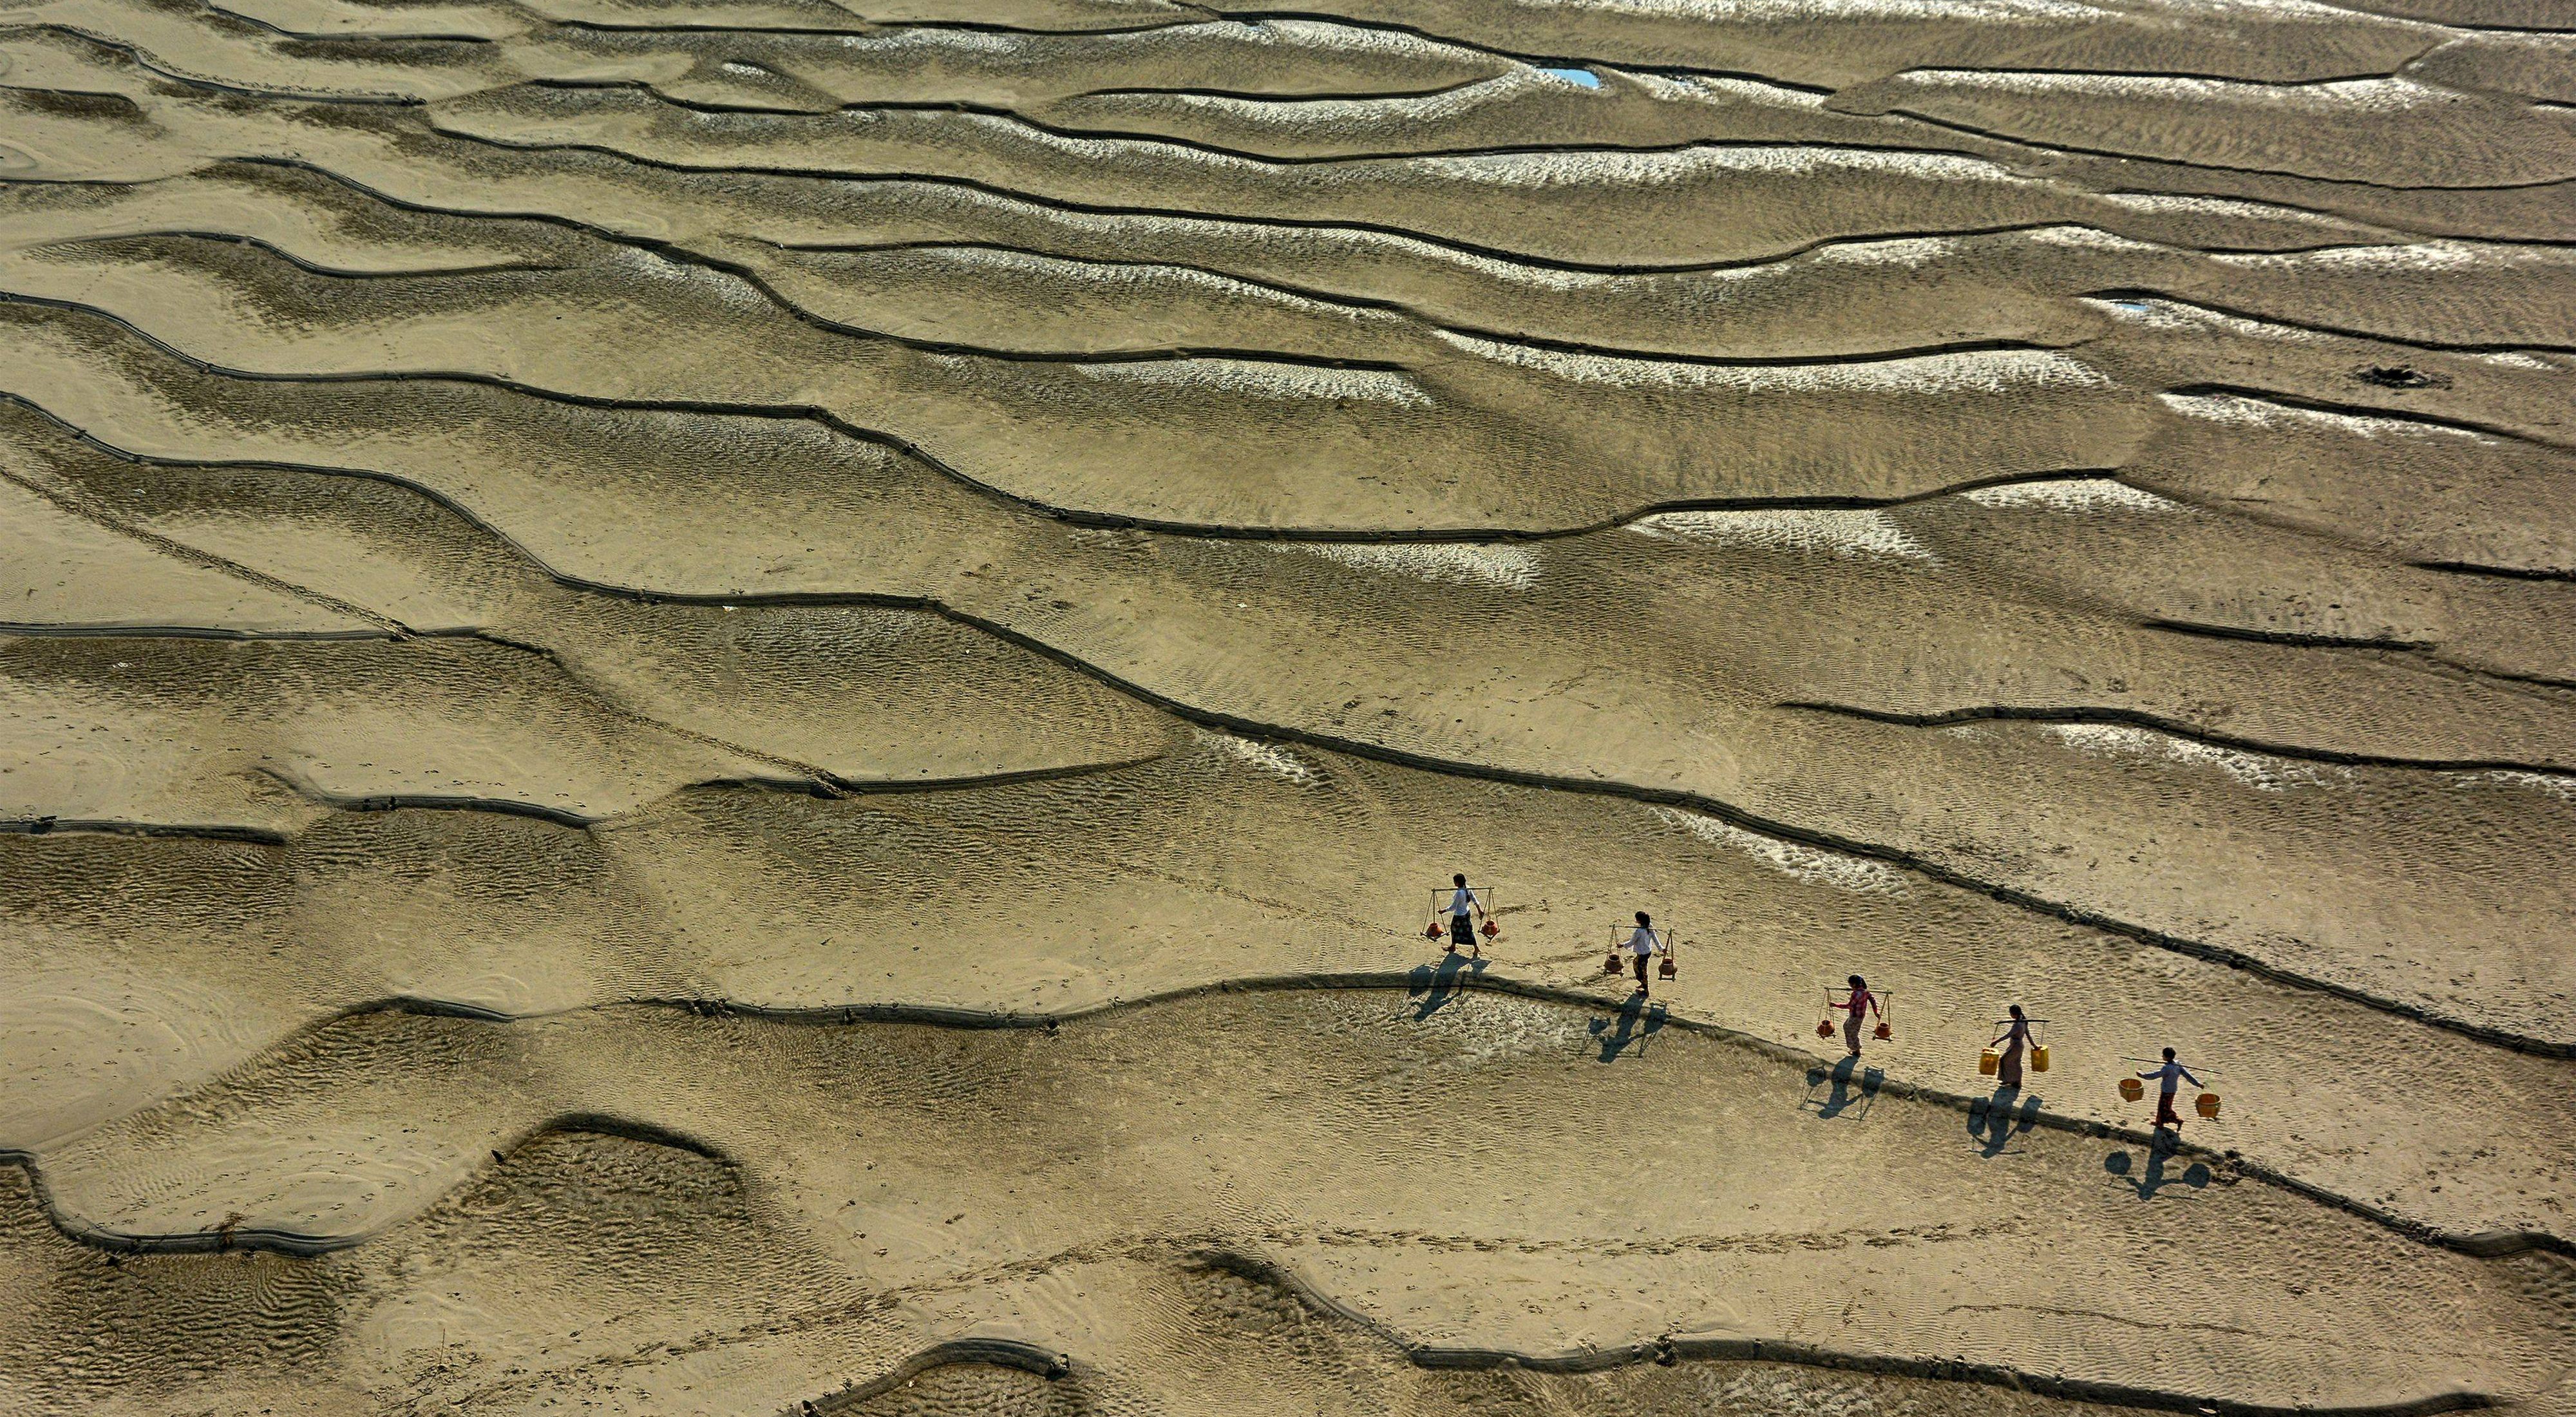 Aerial view of people carrying water in a riverbank.